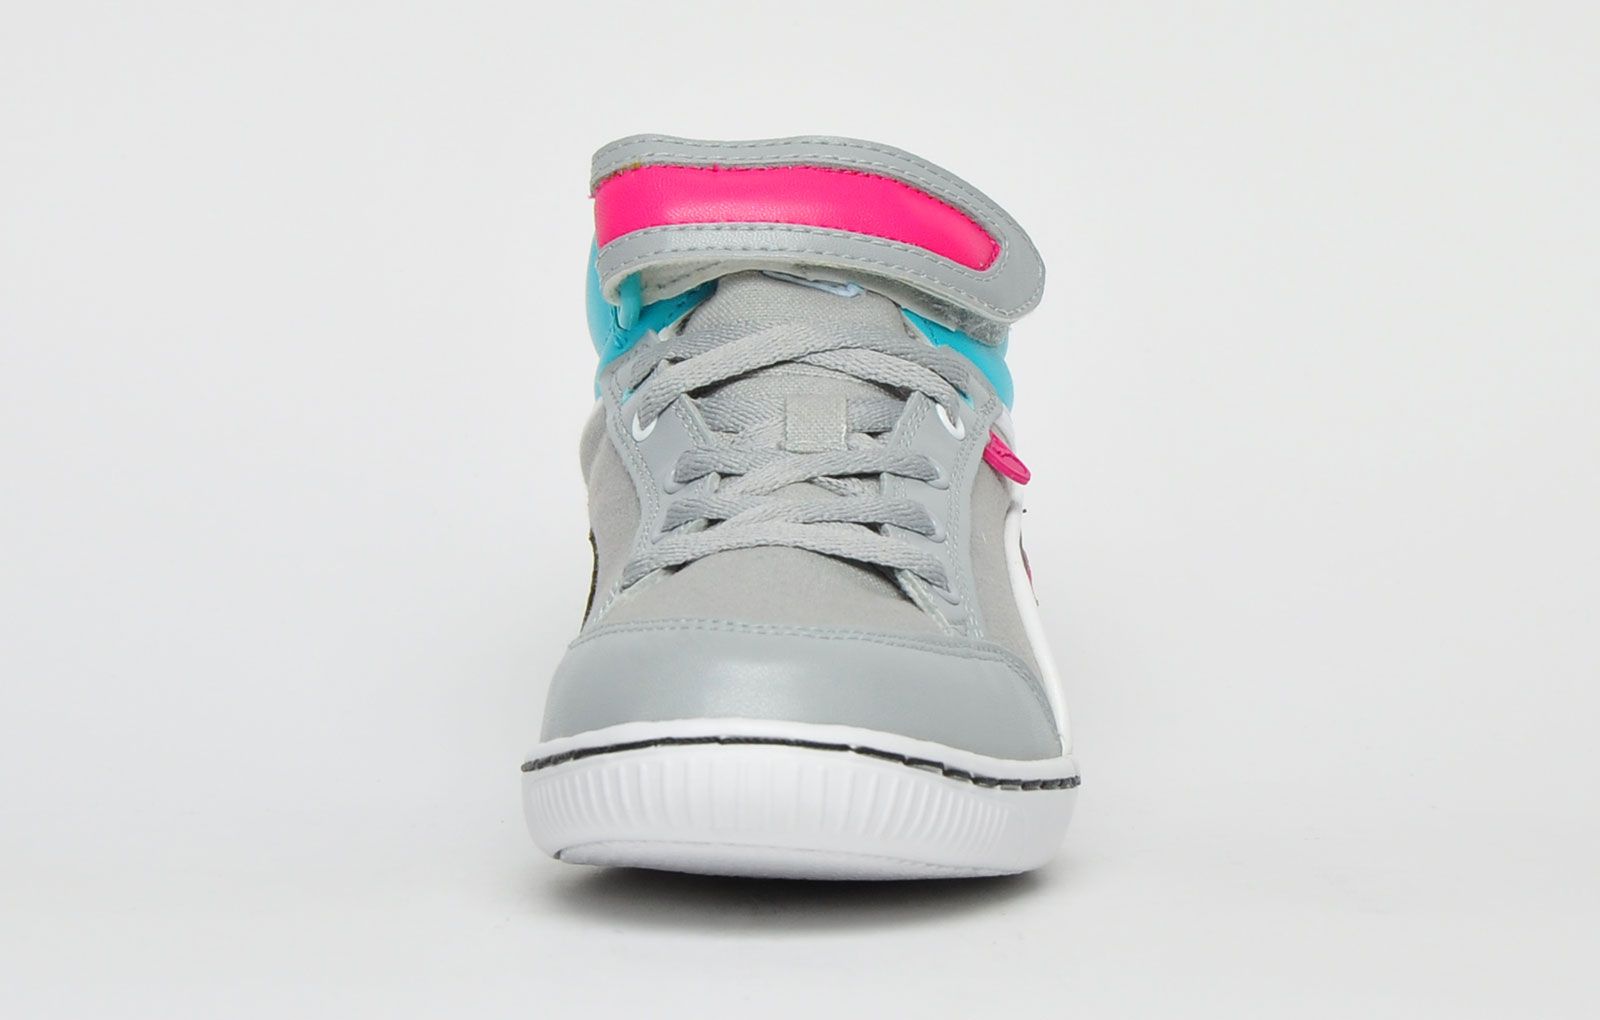 <p>Stay right on trend wherever you go with these women’s Puma Avila Mid trainers. Giving the '80s mid top silhouette an up to date rework. </p> <p>These Avila trainers by Puma are perfect for off-duty weekends and general everyday wear, these stylish trainers come in an cool grey canvas upper and feature a contrasting tonal stitched midsole for a statement finish plus Puma’s famous branding to the sides for the ultimate sign of true quality. </p> <p>These women’s Puma trainers also feature a soft synthetic toe bumper and a heel grip for premium durability fused with a traditional lace-up front for a safe and secure fit. With a feminine mid-top silhouette slightly lower in style than the original retro basketball silhouette, this Avila Mid trainer is the perfect addition for many seasons to come.</p> <p>- Mid top silhouette </p> <p>- Premium canvas upper </p> <p>- Synthetic leather overlays </p> <p>- Secure up front lace up closure </p> <p>- Contrasting tonal stitched midsole for added looks</p> <p>- Durable rubber outsole offers traction across a wide variety of surfaces</p> <p>- Puma branding throughout</p>